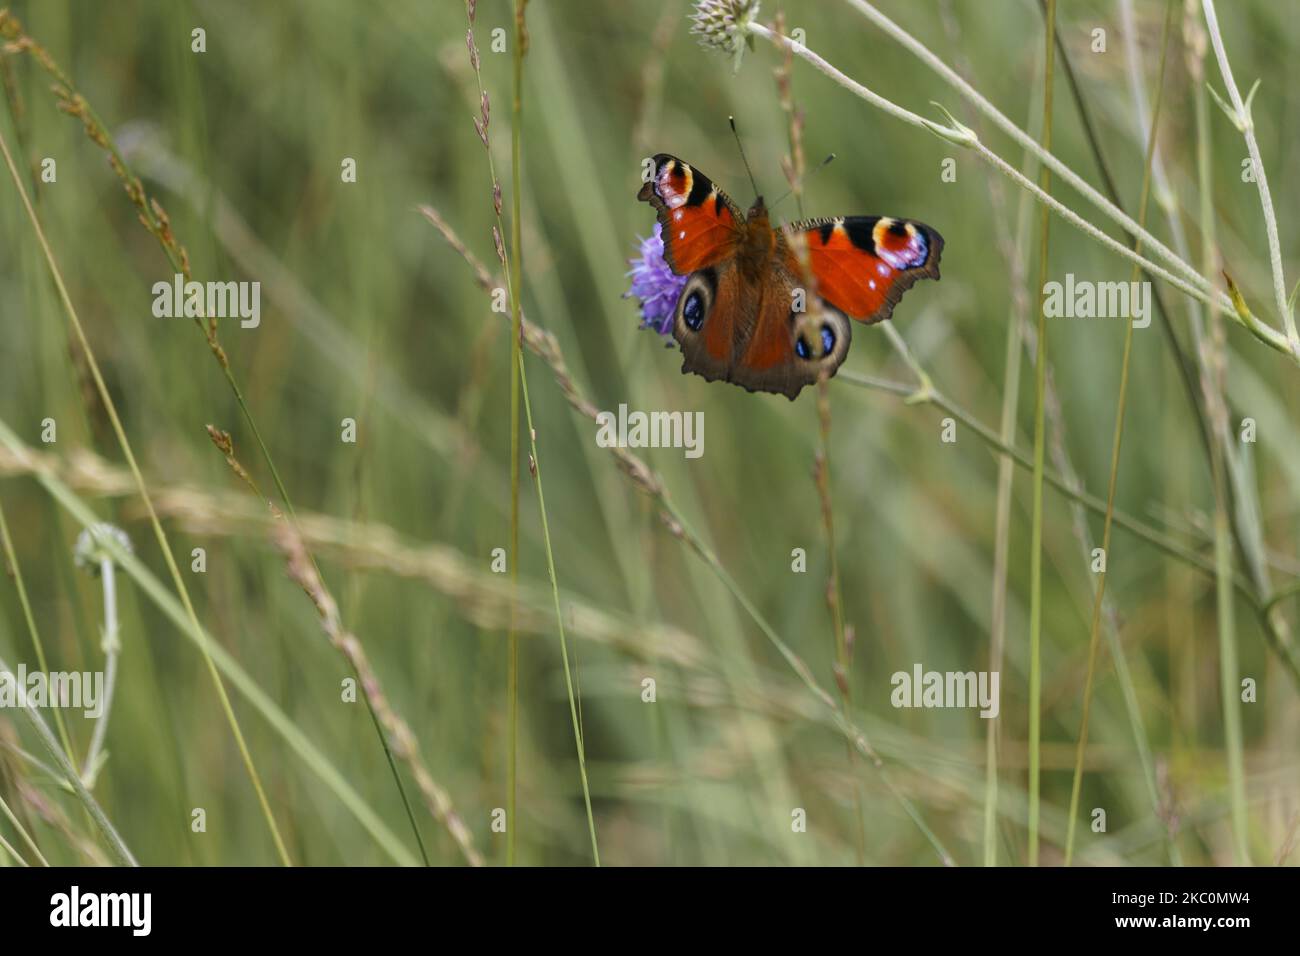 Peacock butterfly or Aglais io sitting on a lilac colored flowers in a green meadow with lots of grass Stock Photo